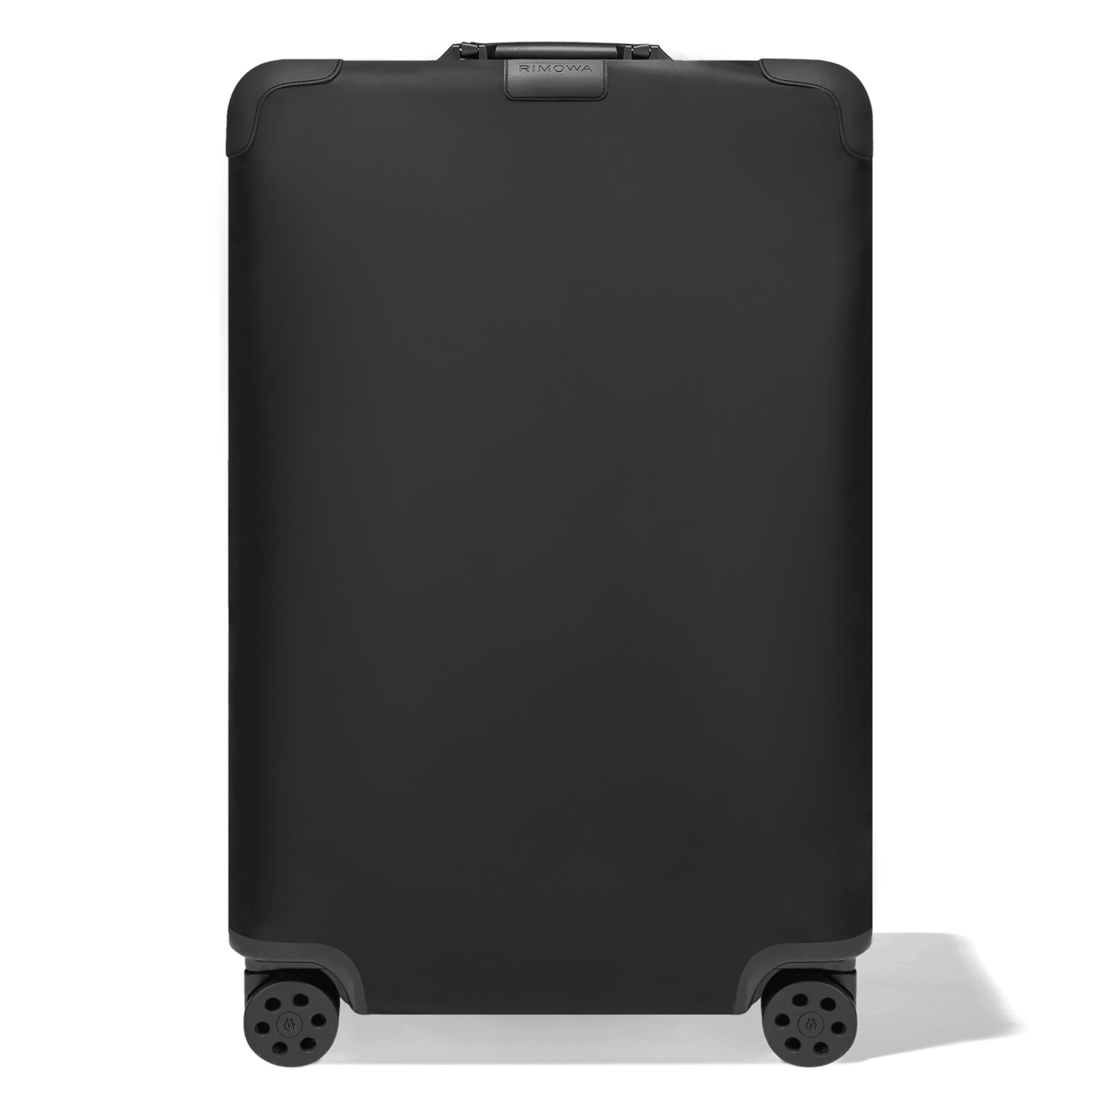 cover for rimowa luggage